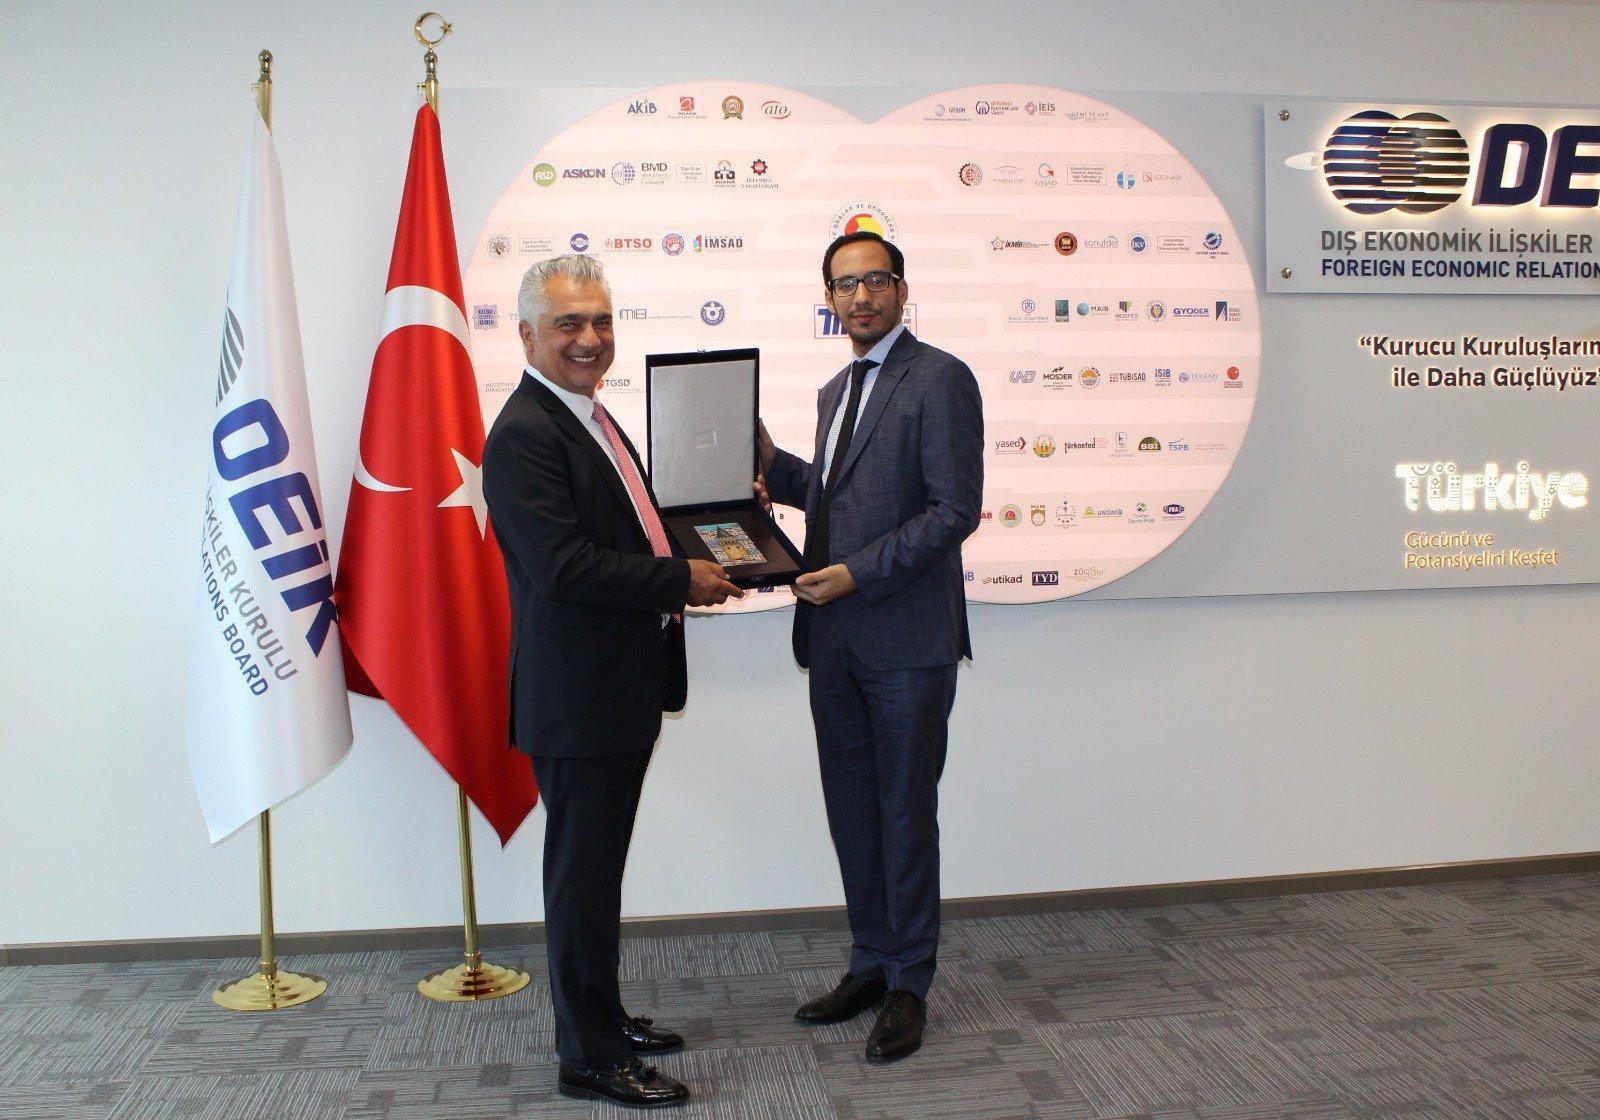 Ibrajim Bukele’s trip to Turkey in August 2019 as a special guest of the Minister of Foreign Relations was paid from public funds. He was introduced there as an advisor to the president. This photo was published August 22, 2019 on social media by DEIK, a Turkish business association. Ibrajim Bukele is pictured greeting one of the DEIK executives. Photo published by DEIK.